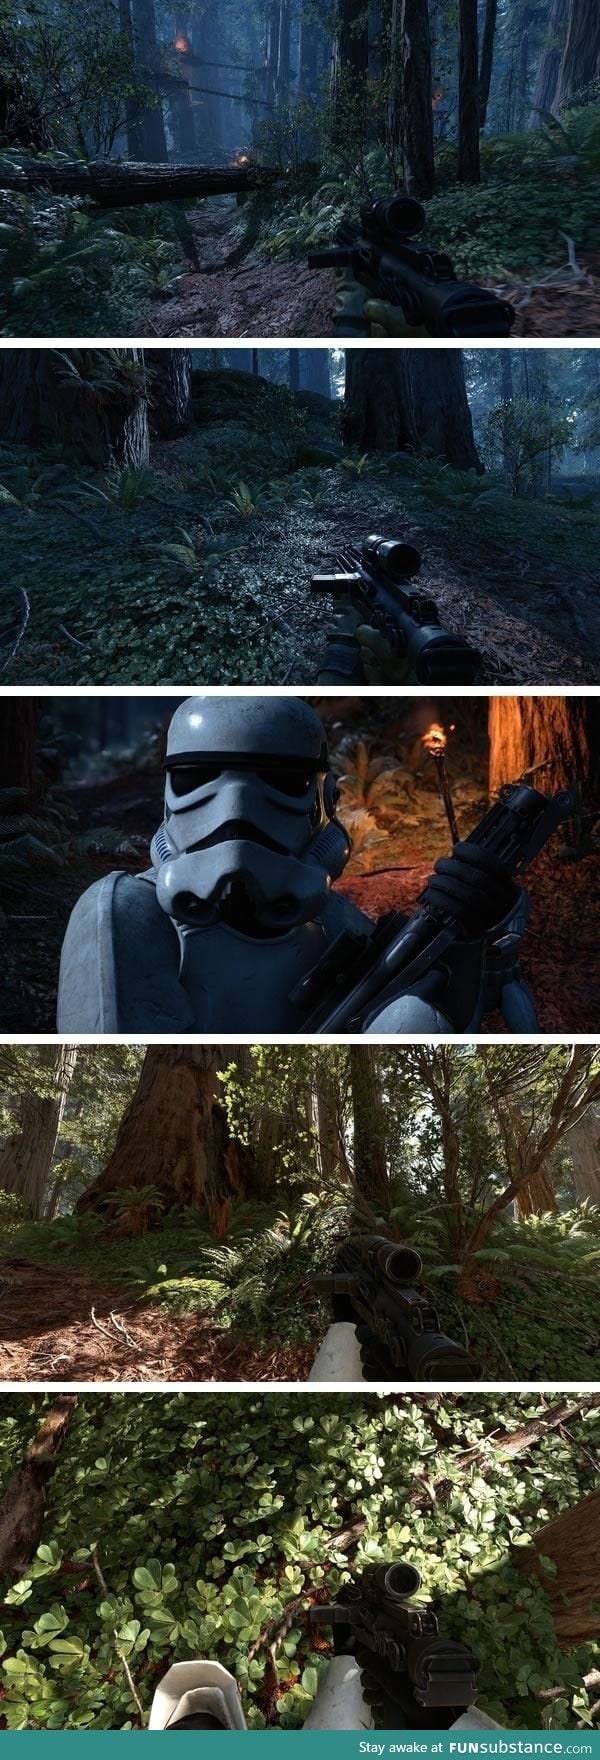 Star Wars: Battlefront graphics on PC (4K) - just jaw-dropping